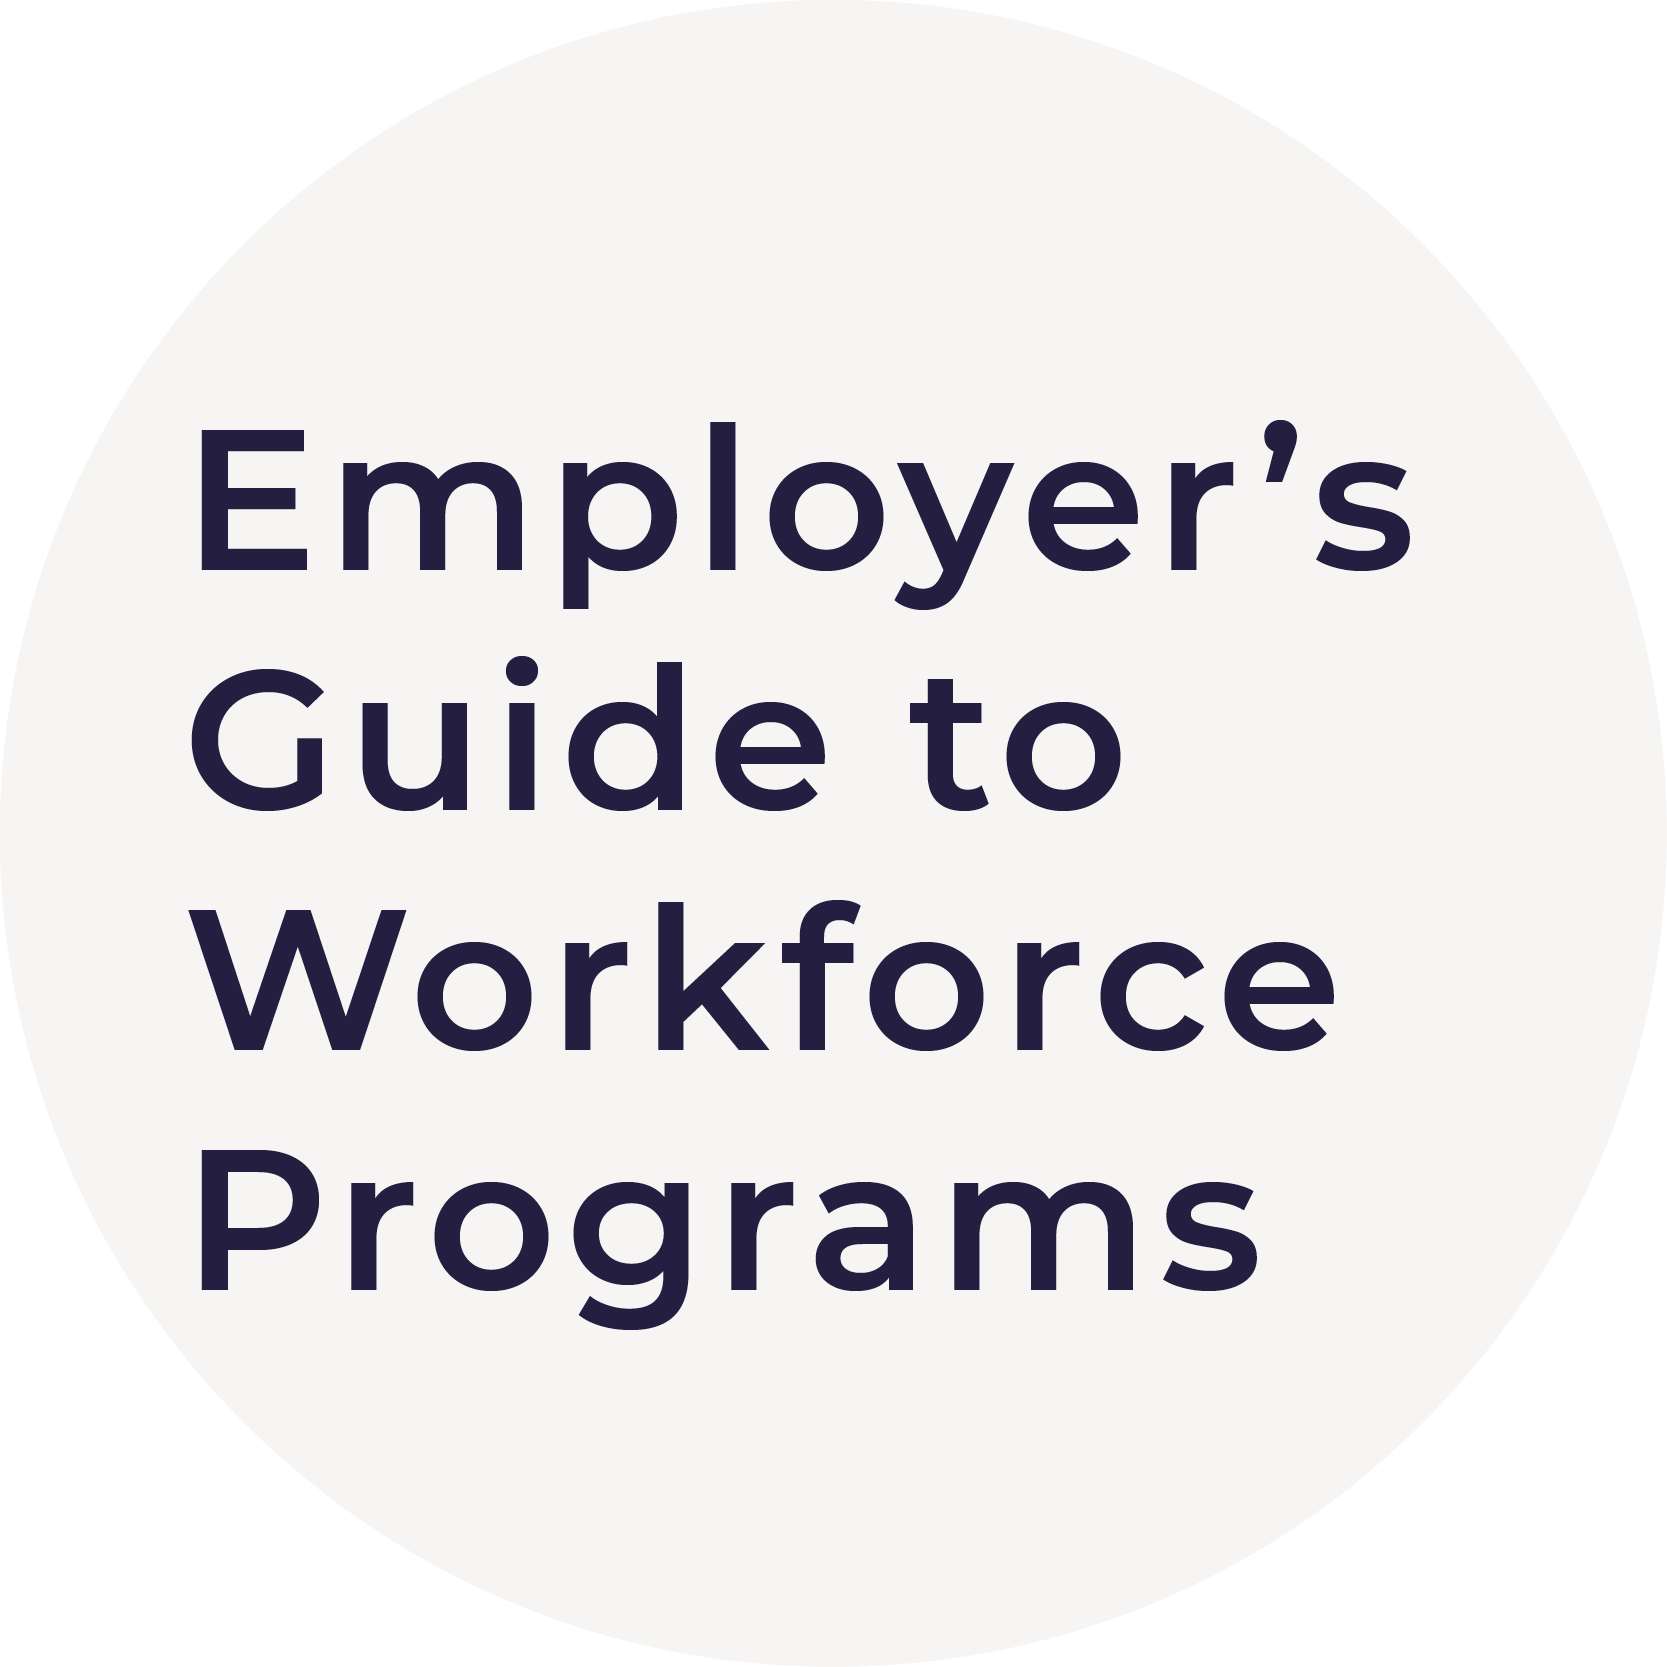 EMPLOYER'S GUIDE TO WORKFORCE PROGRAMS